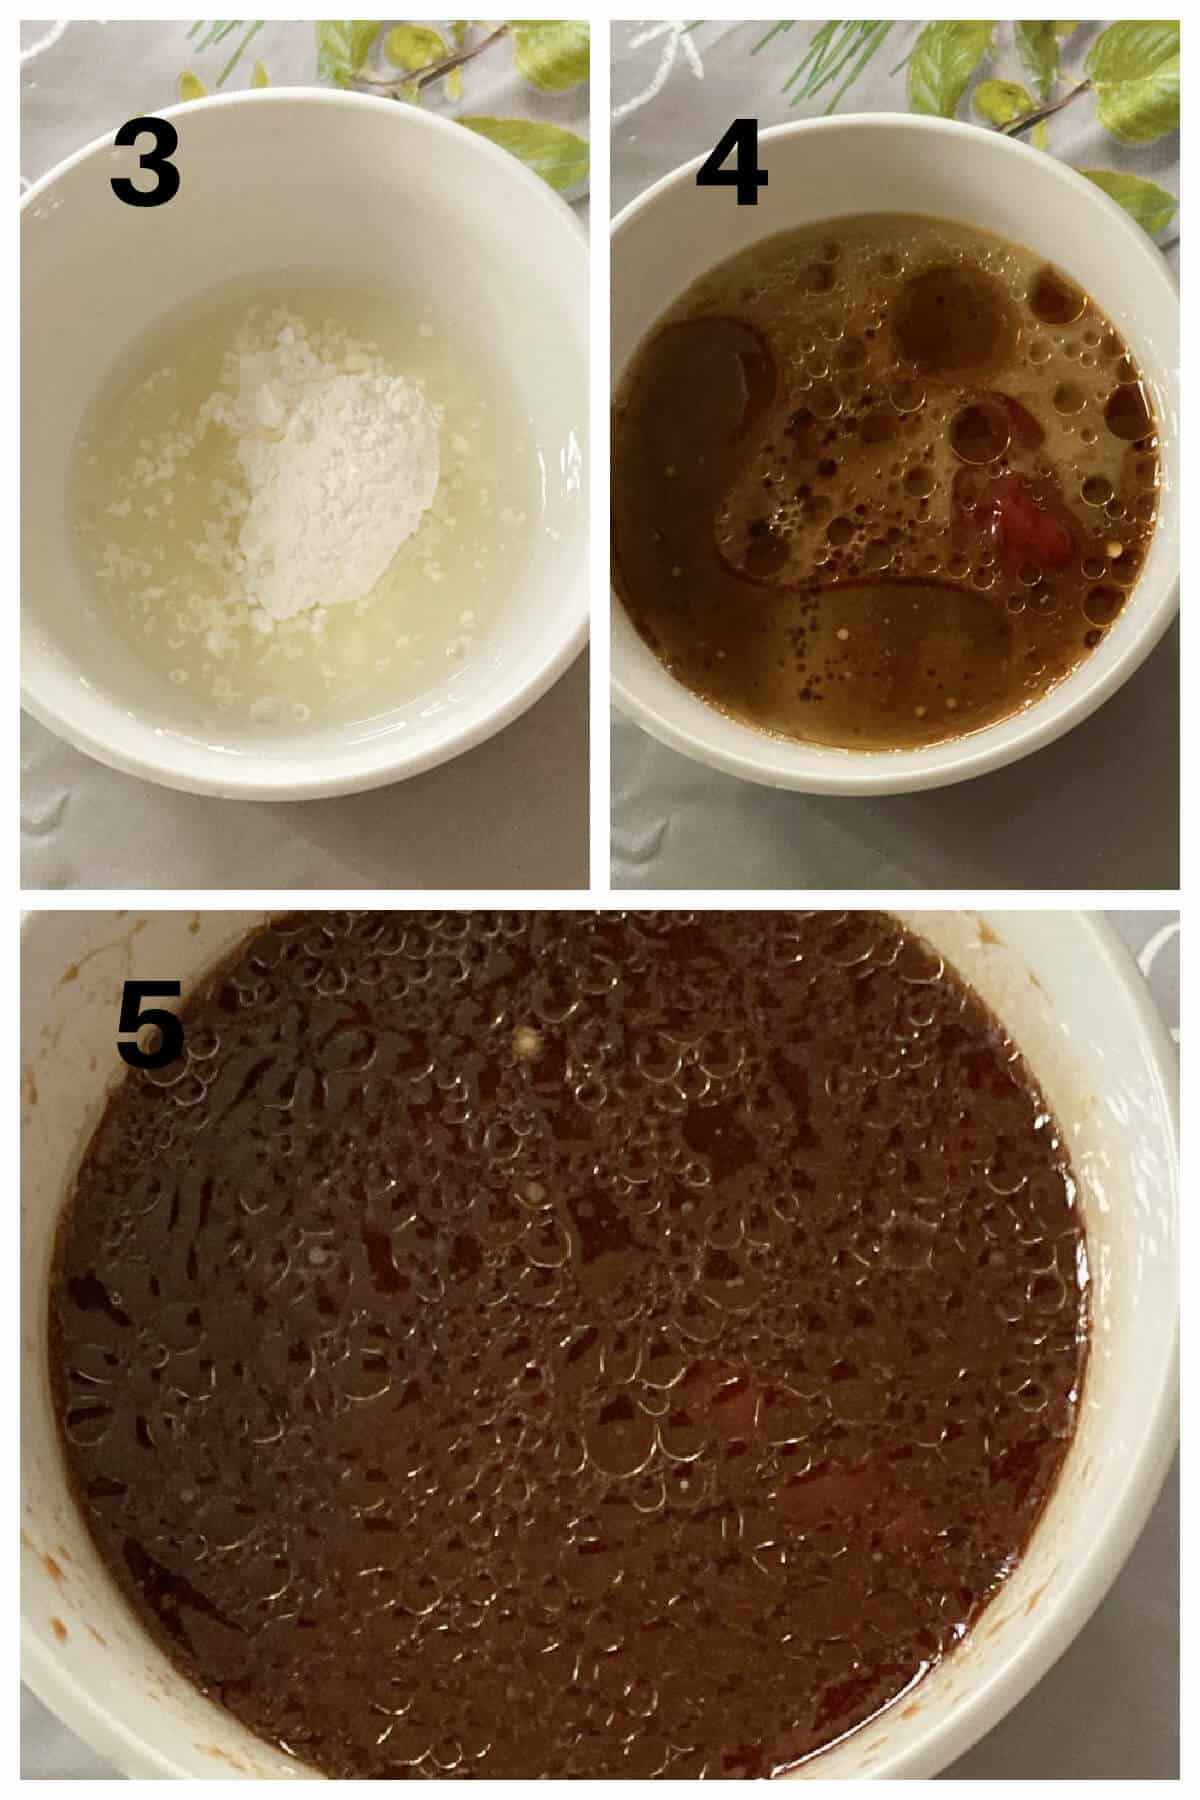 Collage of 3 photos to show how to make sweet and sour sauce.